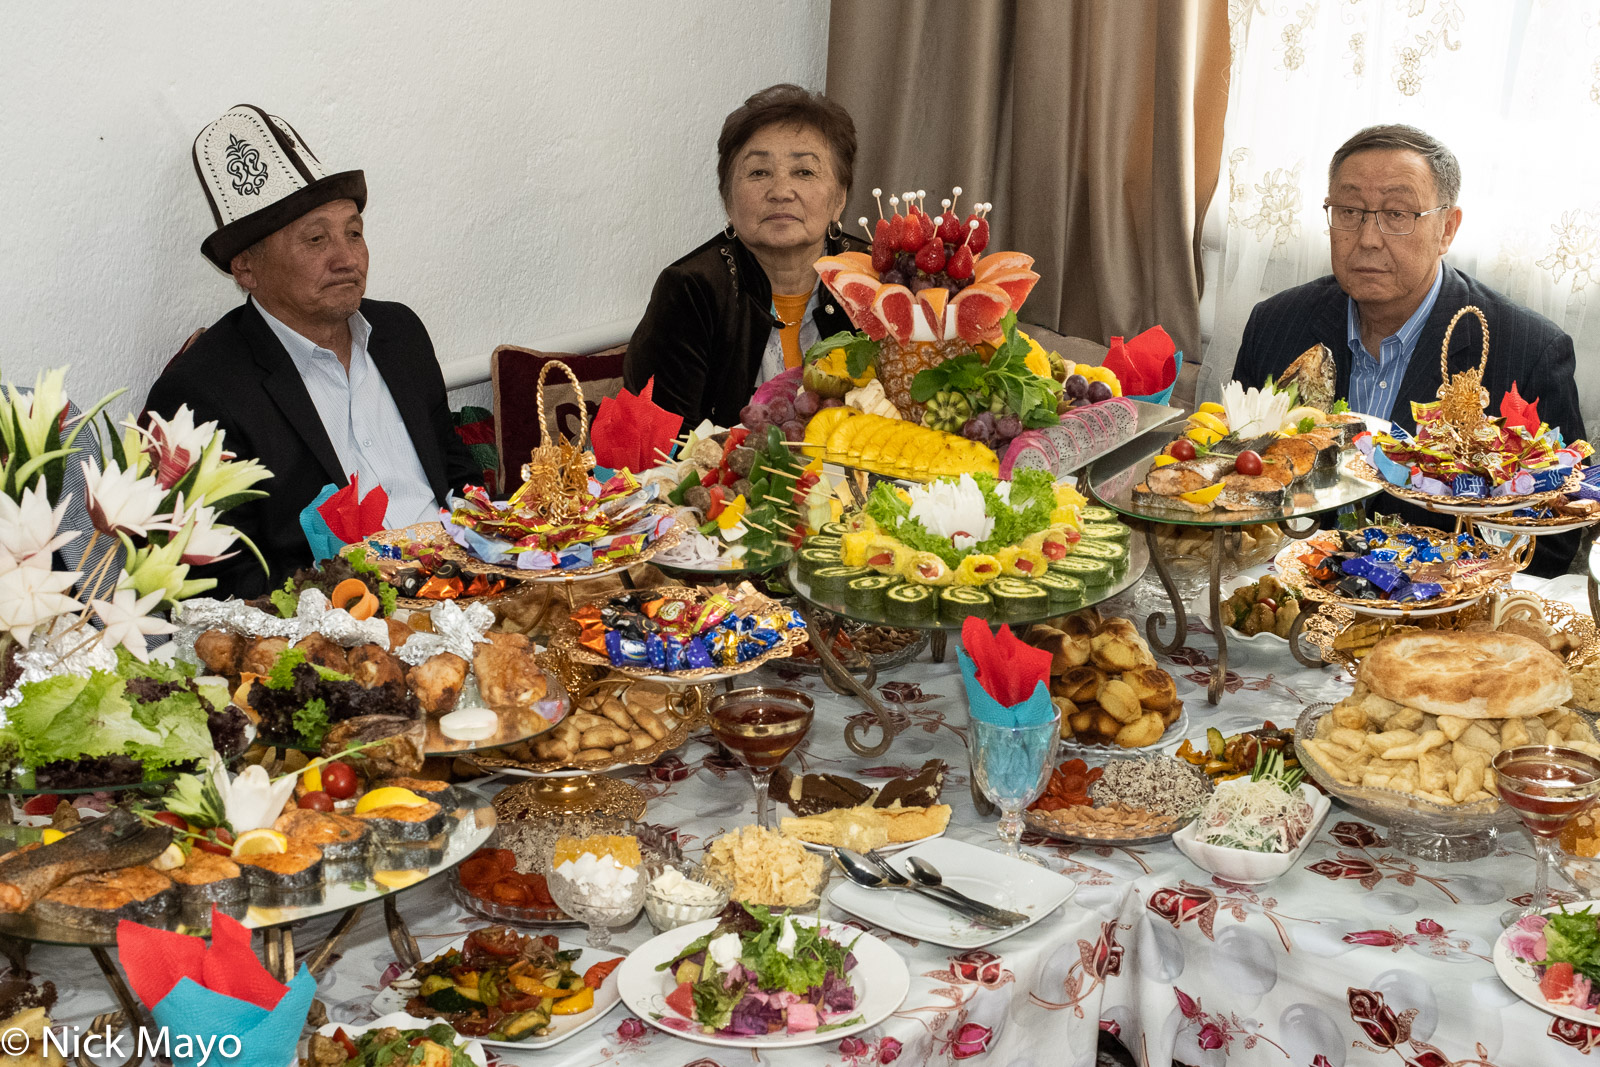 Guests at a wedding meal in the village of Tolok.